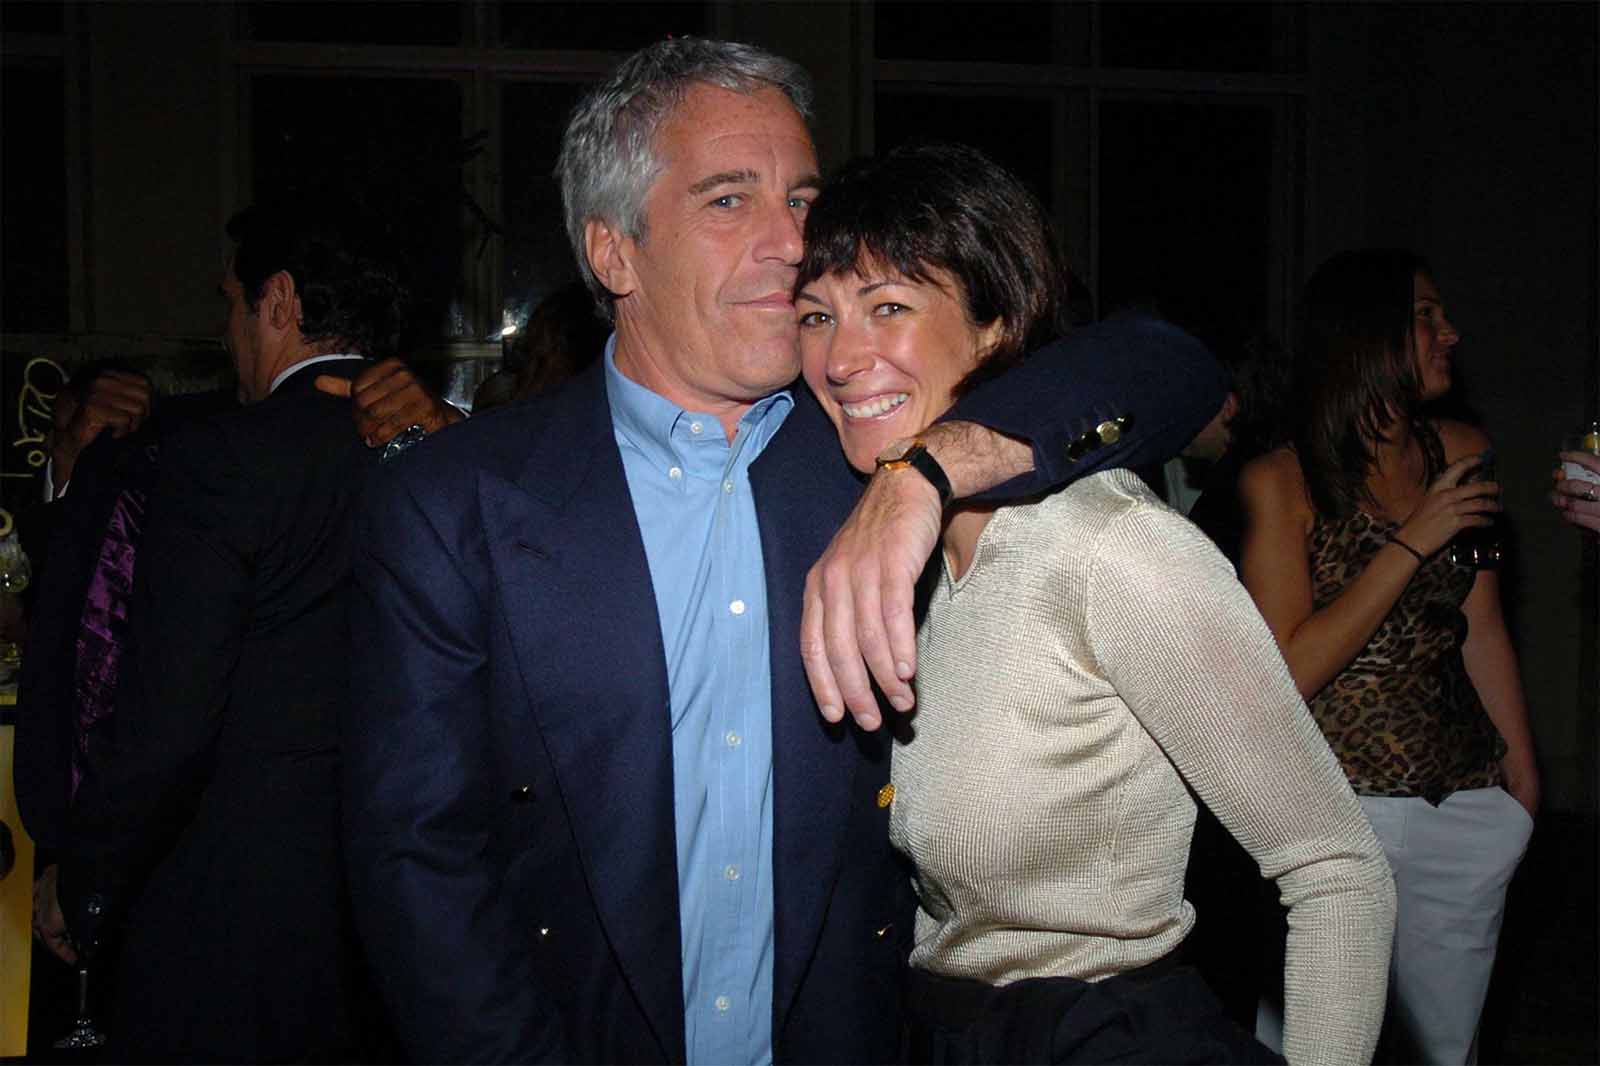 We know the horror stories about Little St. James, and the Lolita Express. But what exactly went down on Jeffrey Epstein's island? 